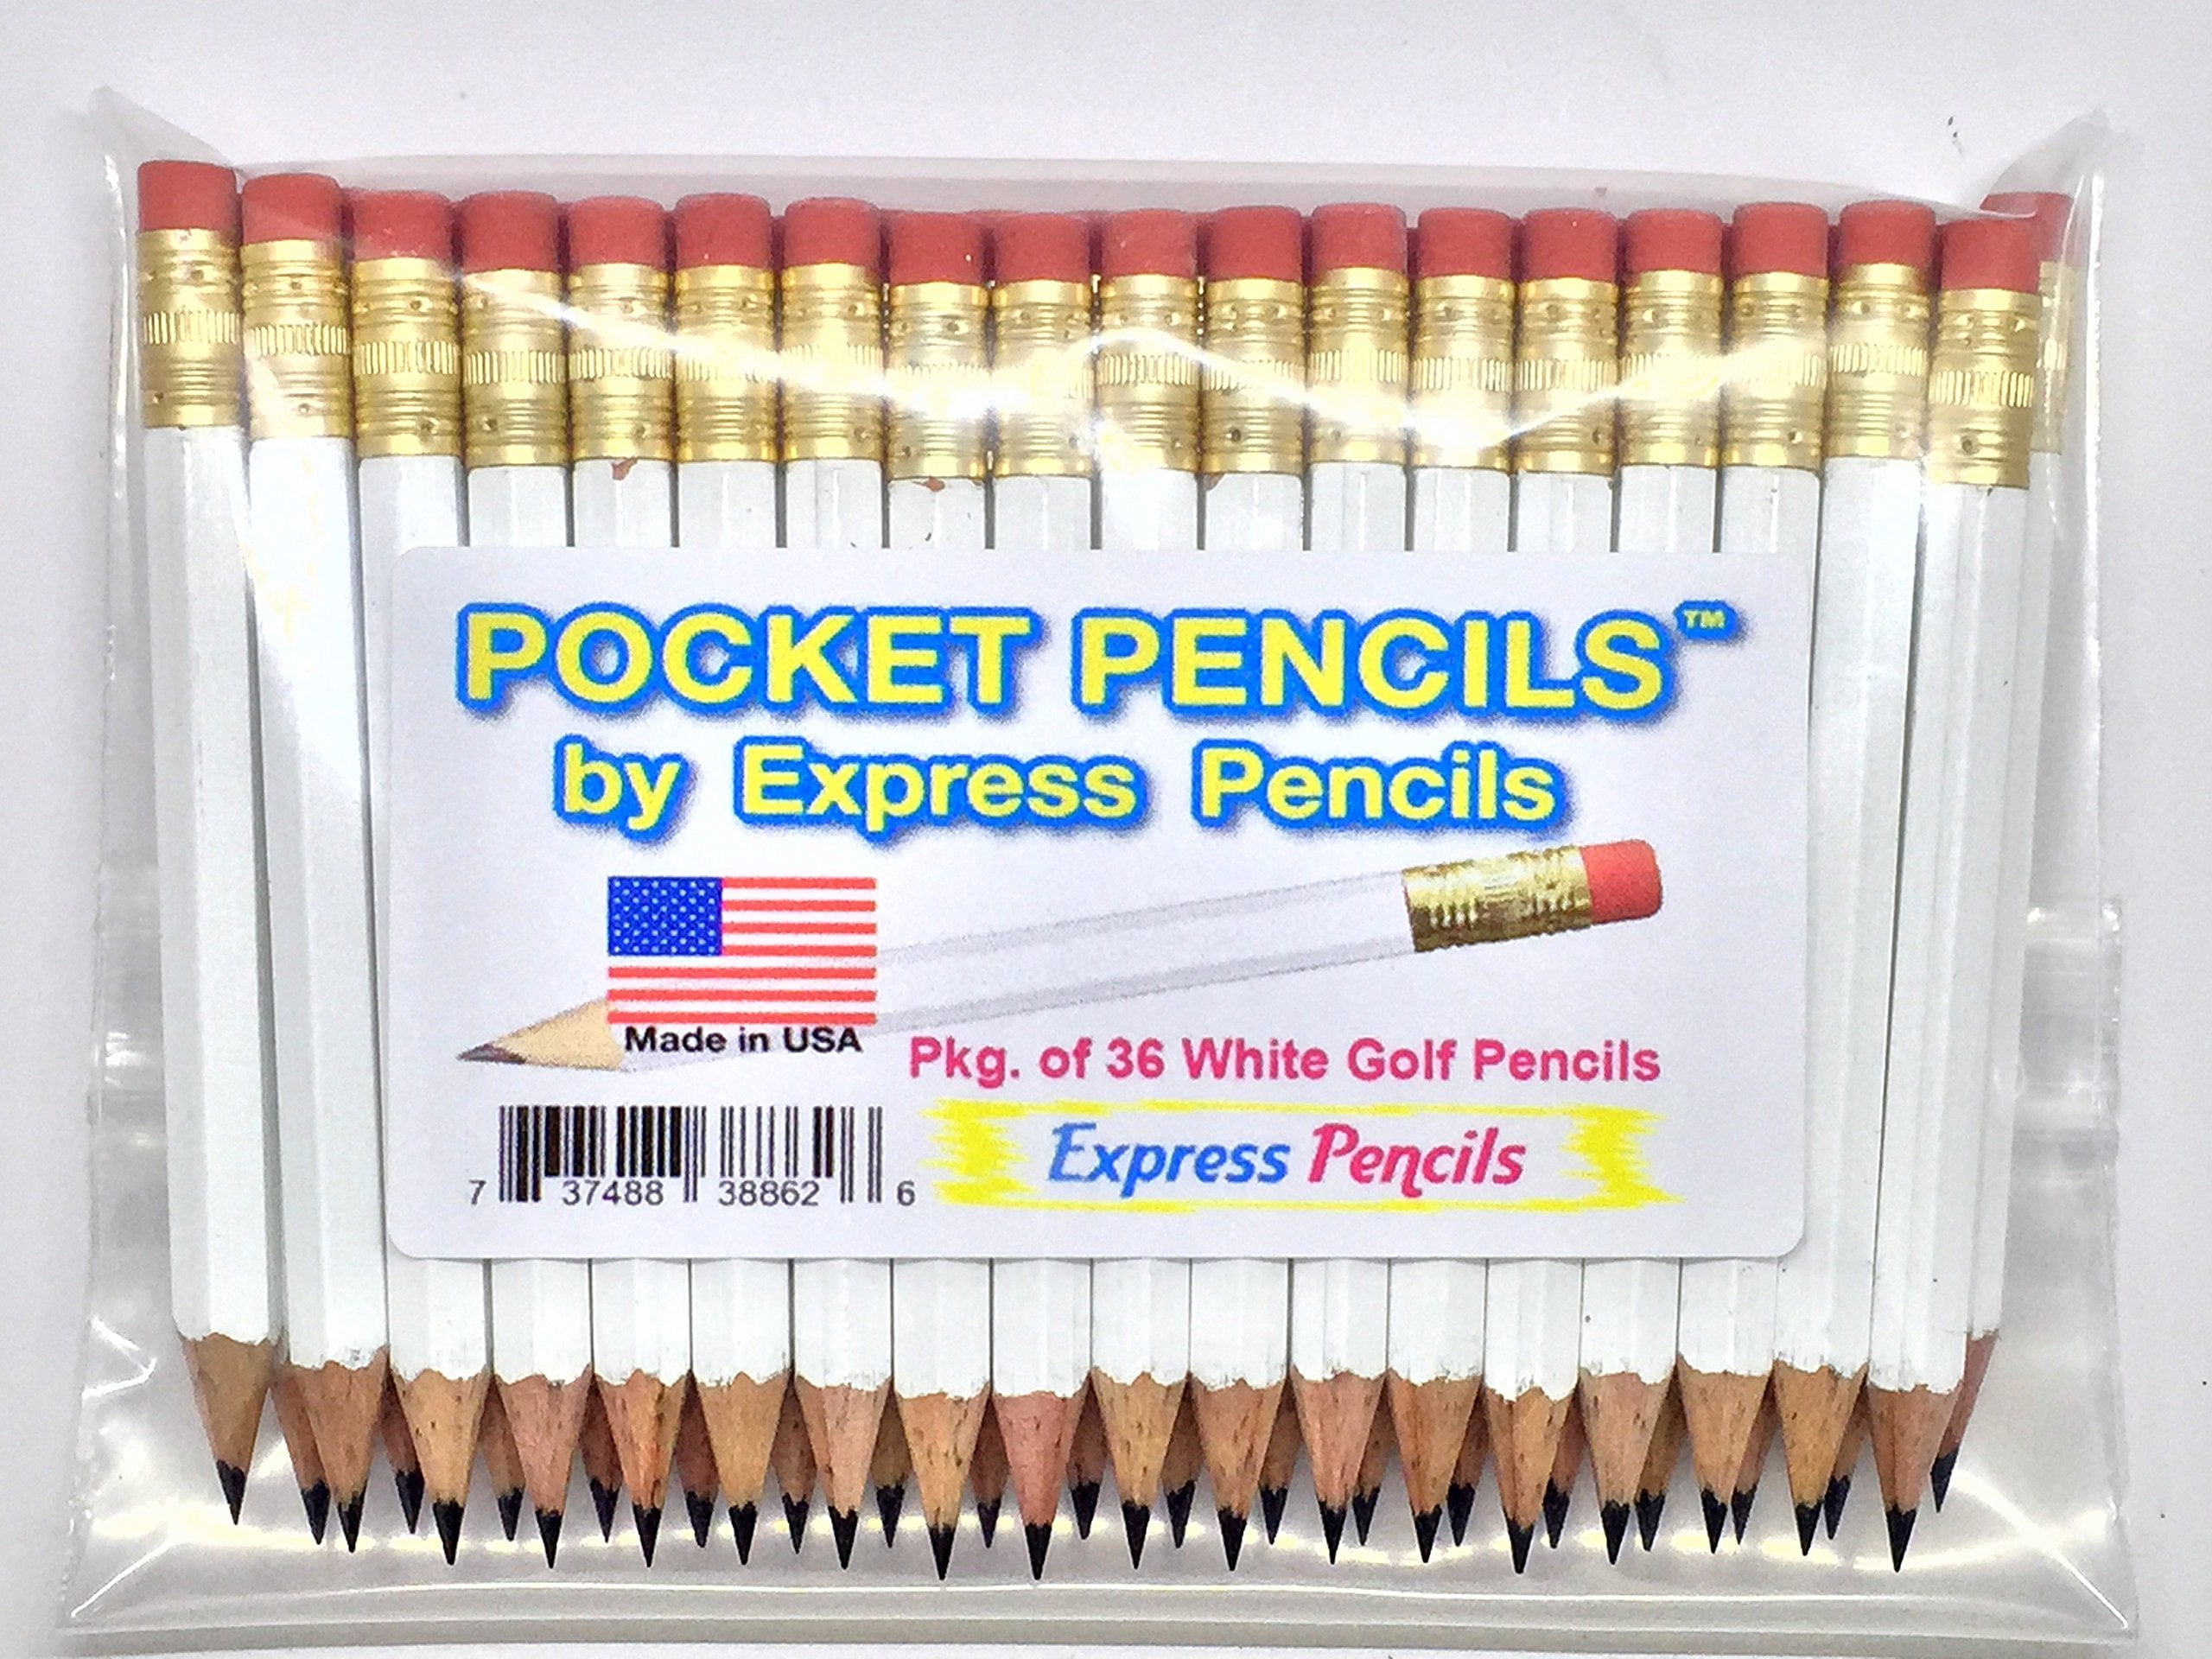  Half Pencils with Eraser - Golf, Classroom, Pew, Short, Mini -  Hexagon, Sharpened, Non Toxic, 2 Pencil, Color - Light Turquoise, (Box of  48) Golf Pocket Pencils : Office Products